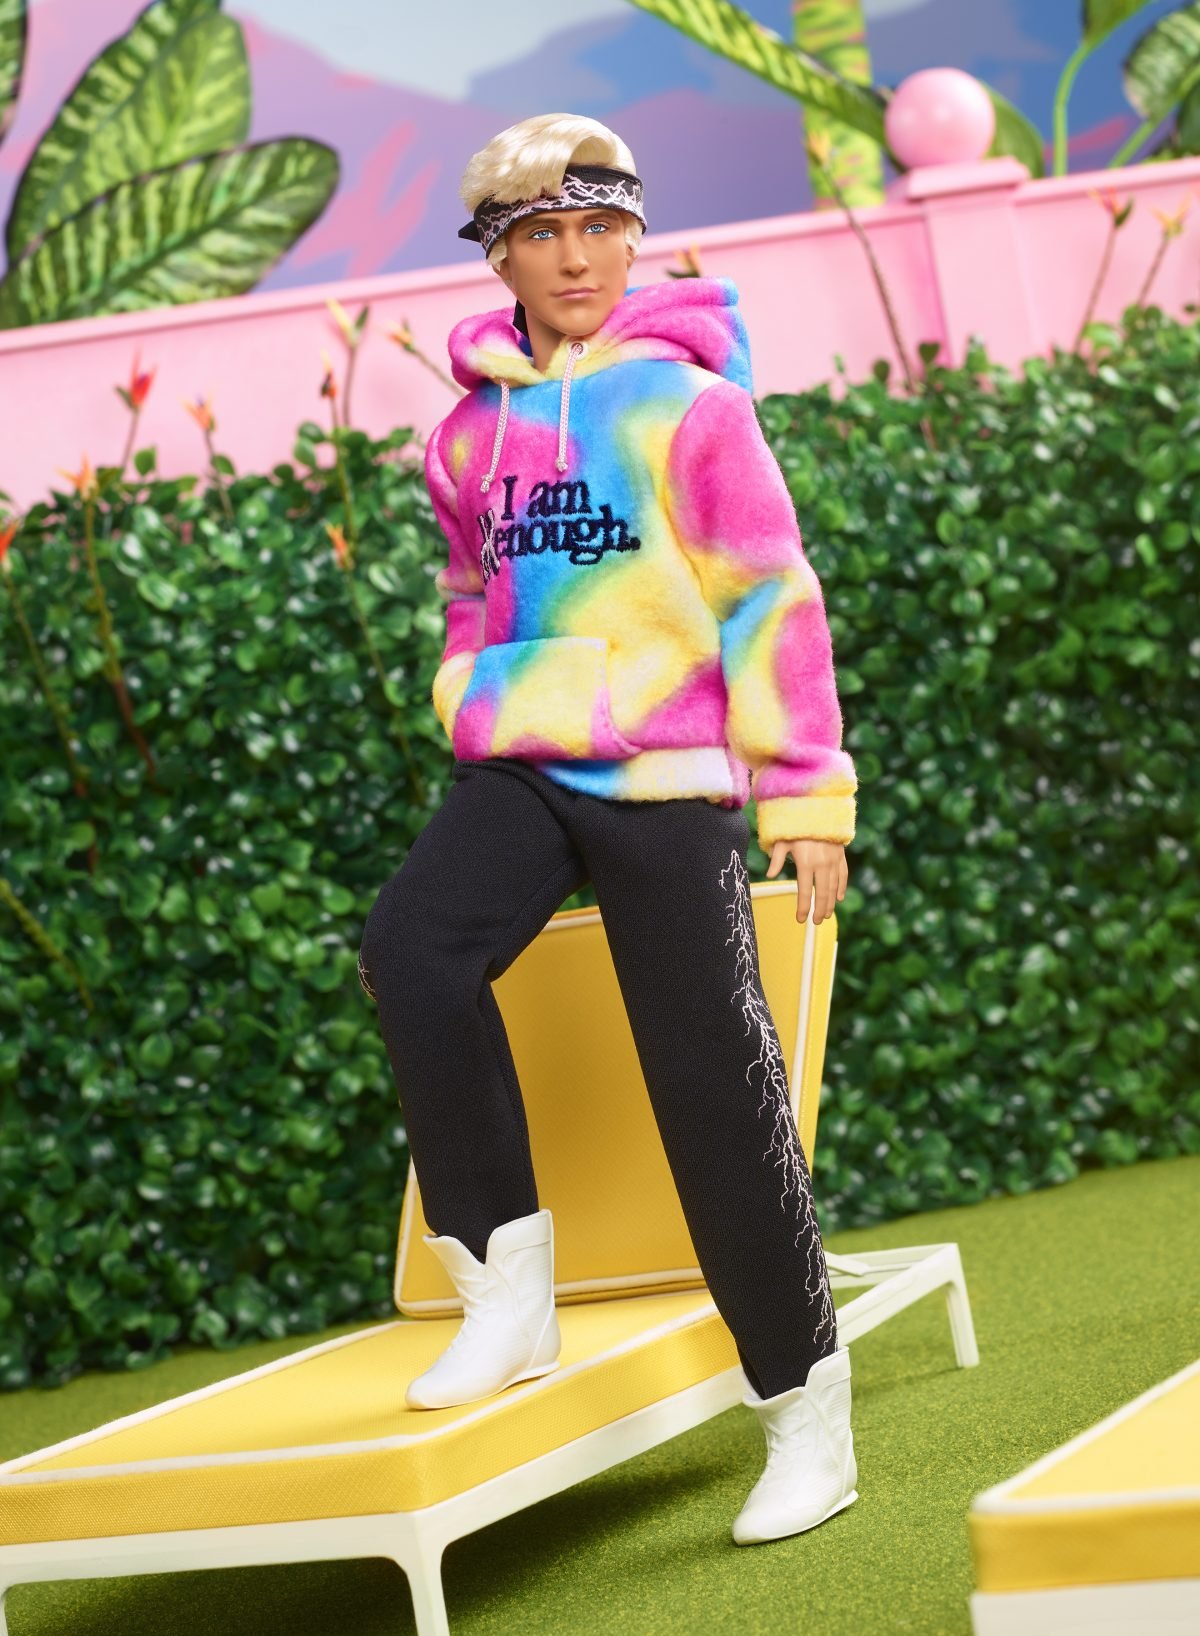 I am Kenough Ken Doll sweater hoodie is now available to buy HERO image